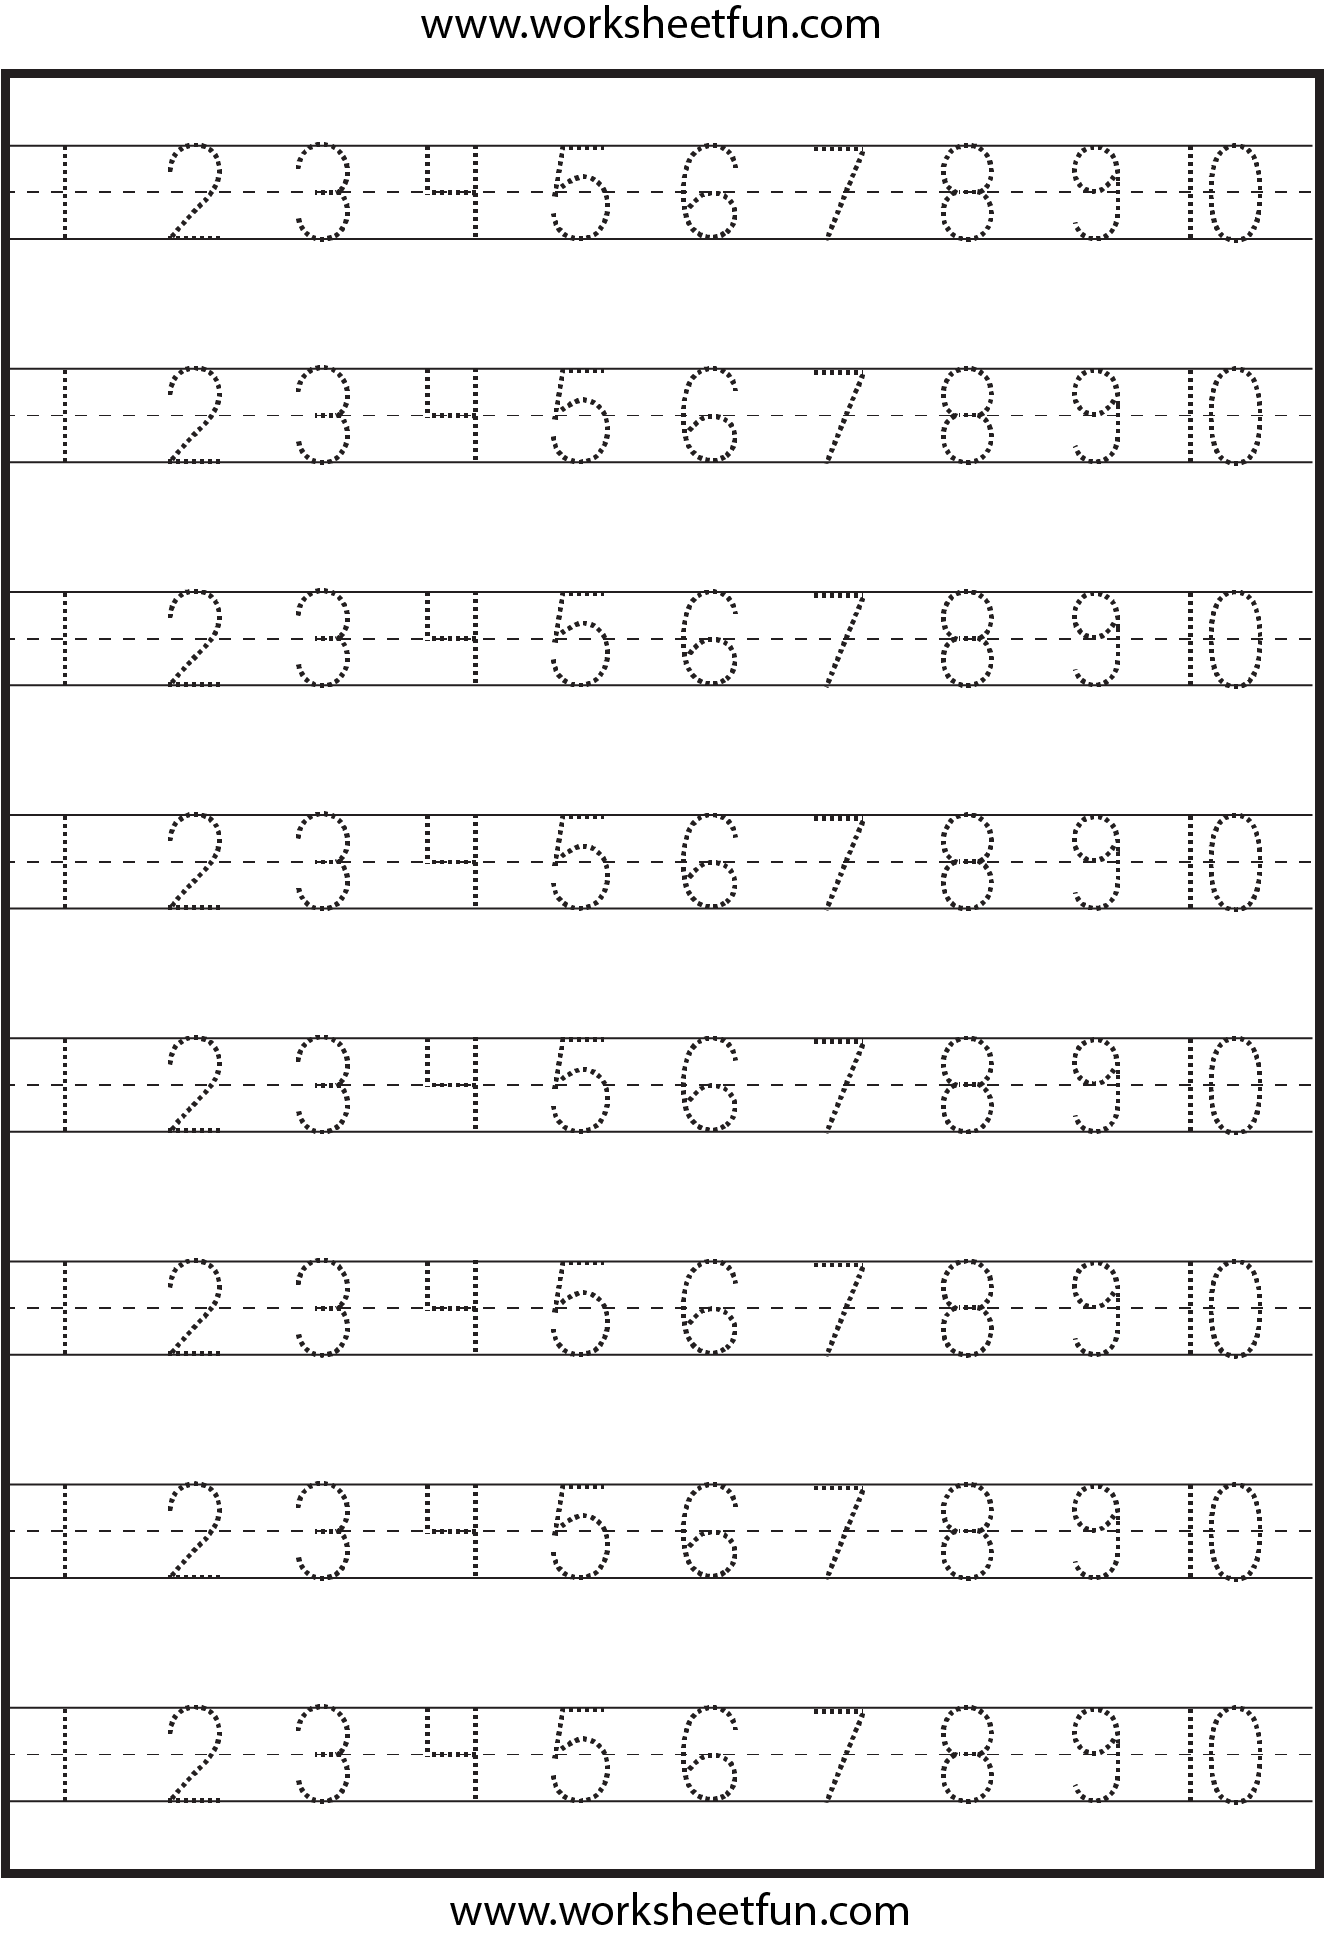 free-printable-number-1-10-worksheets-printable-form-templates-and